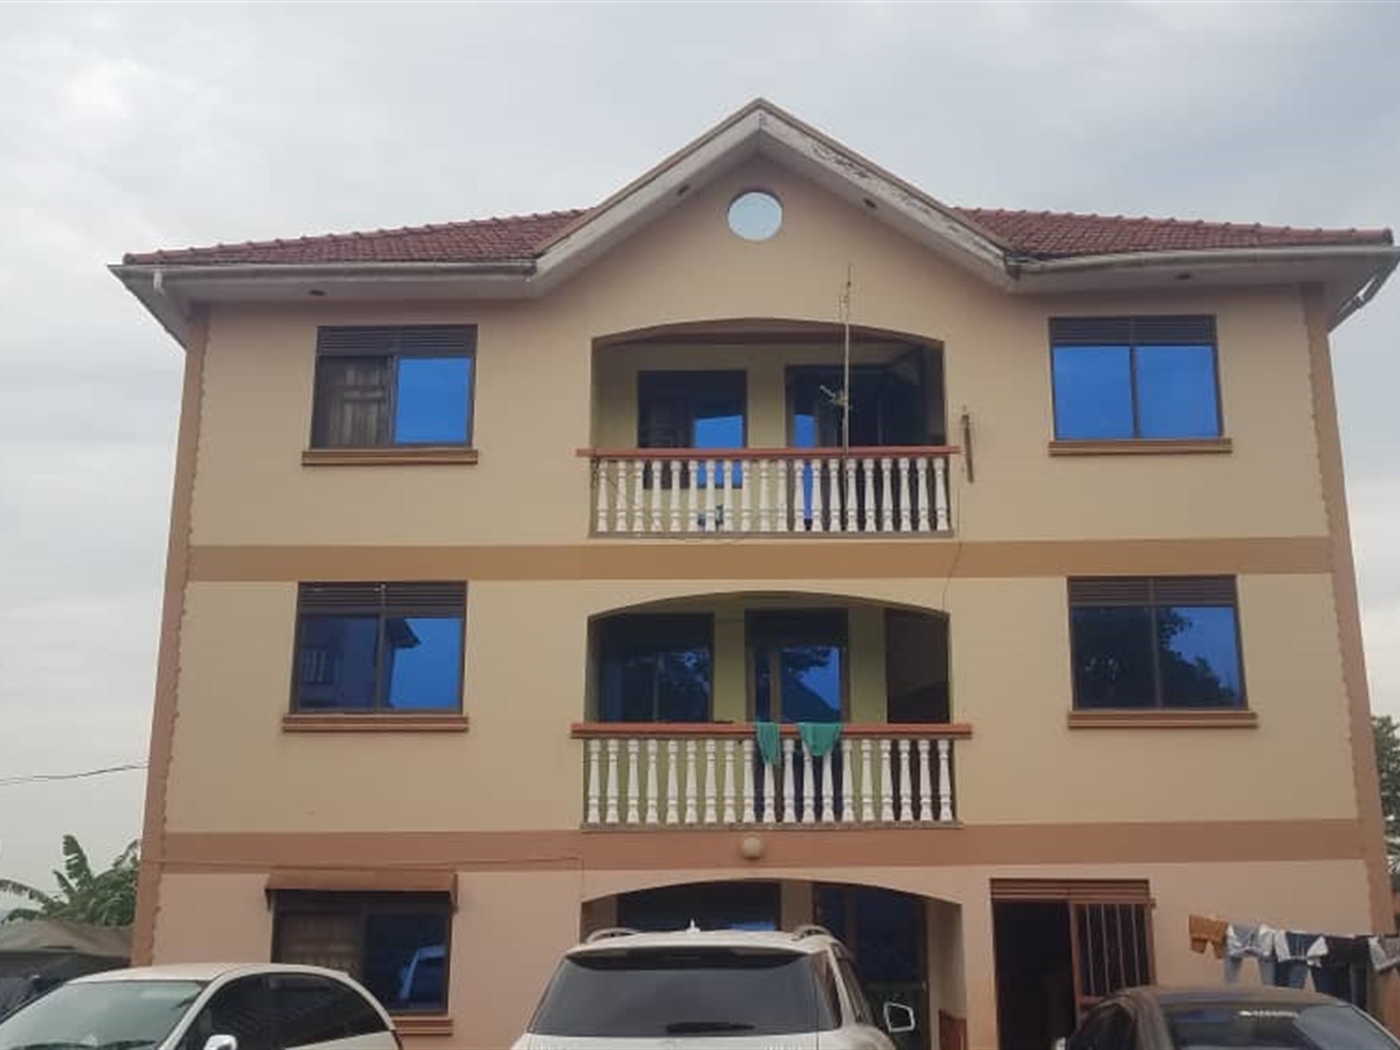 Apartment block for sale in Bweyogerere Wakiso